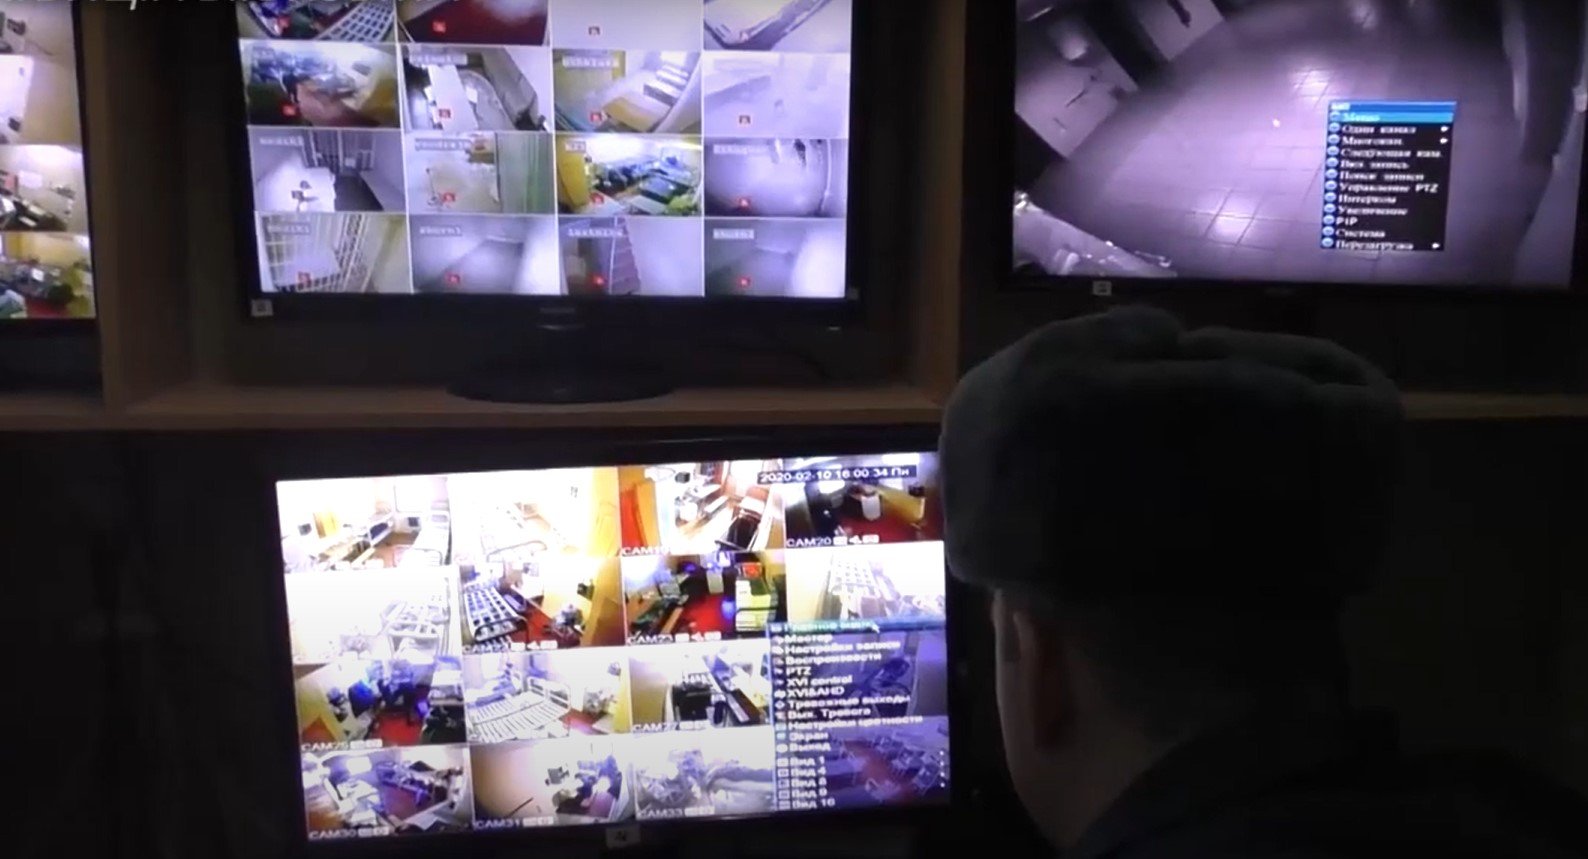 A warden in the Vyazemskoe Detention Center watches prisoners through surveillance cameras. Screenshot from a video by the Vyazemsky Information Centre prepared for the celebration of the center's 85th anniversary in 2020